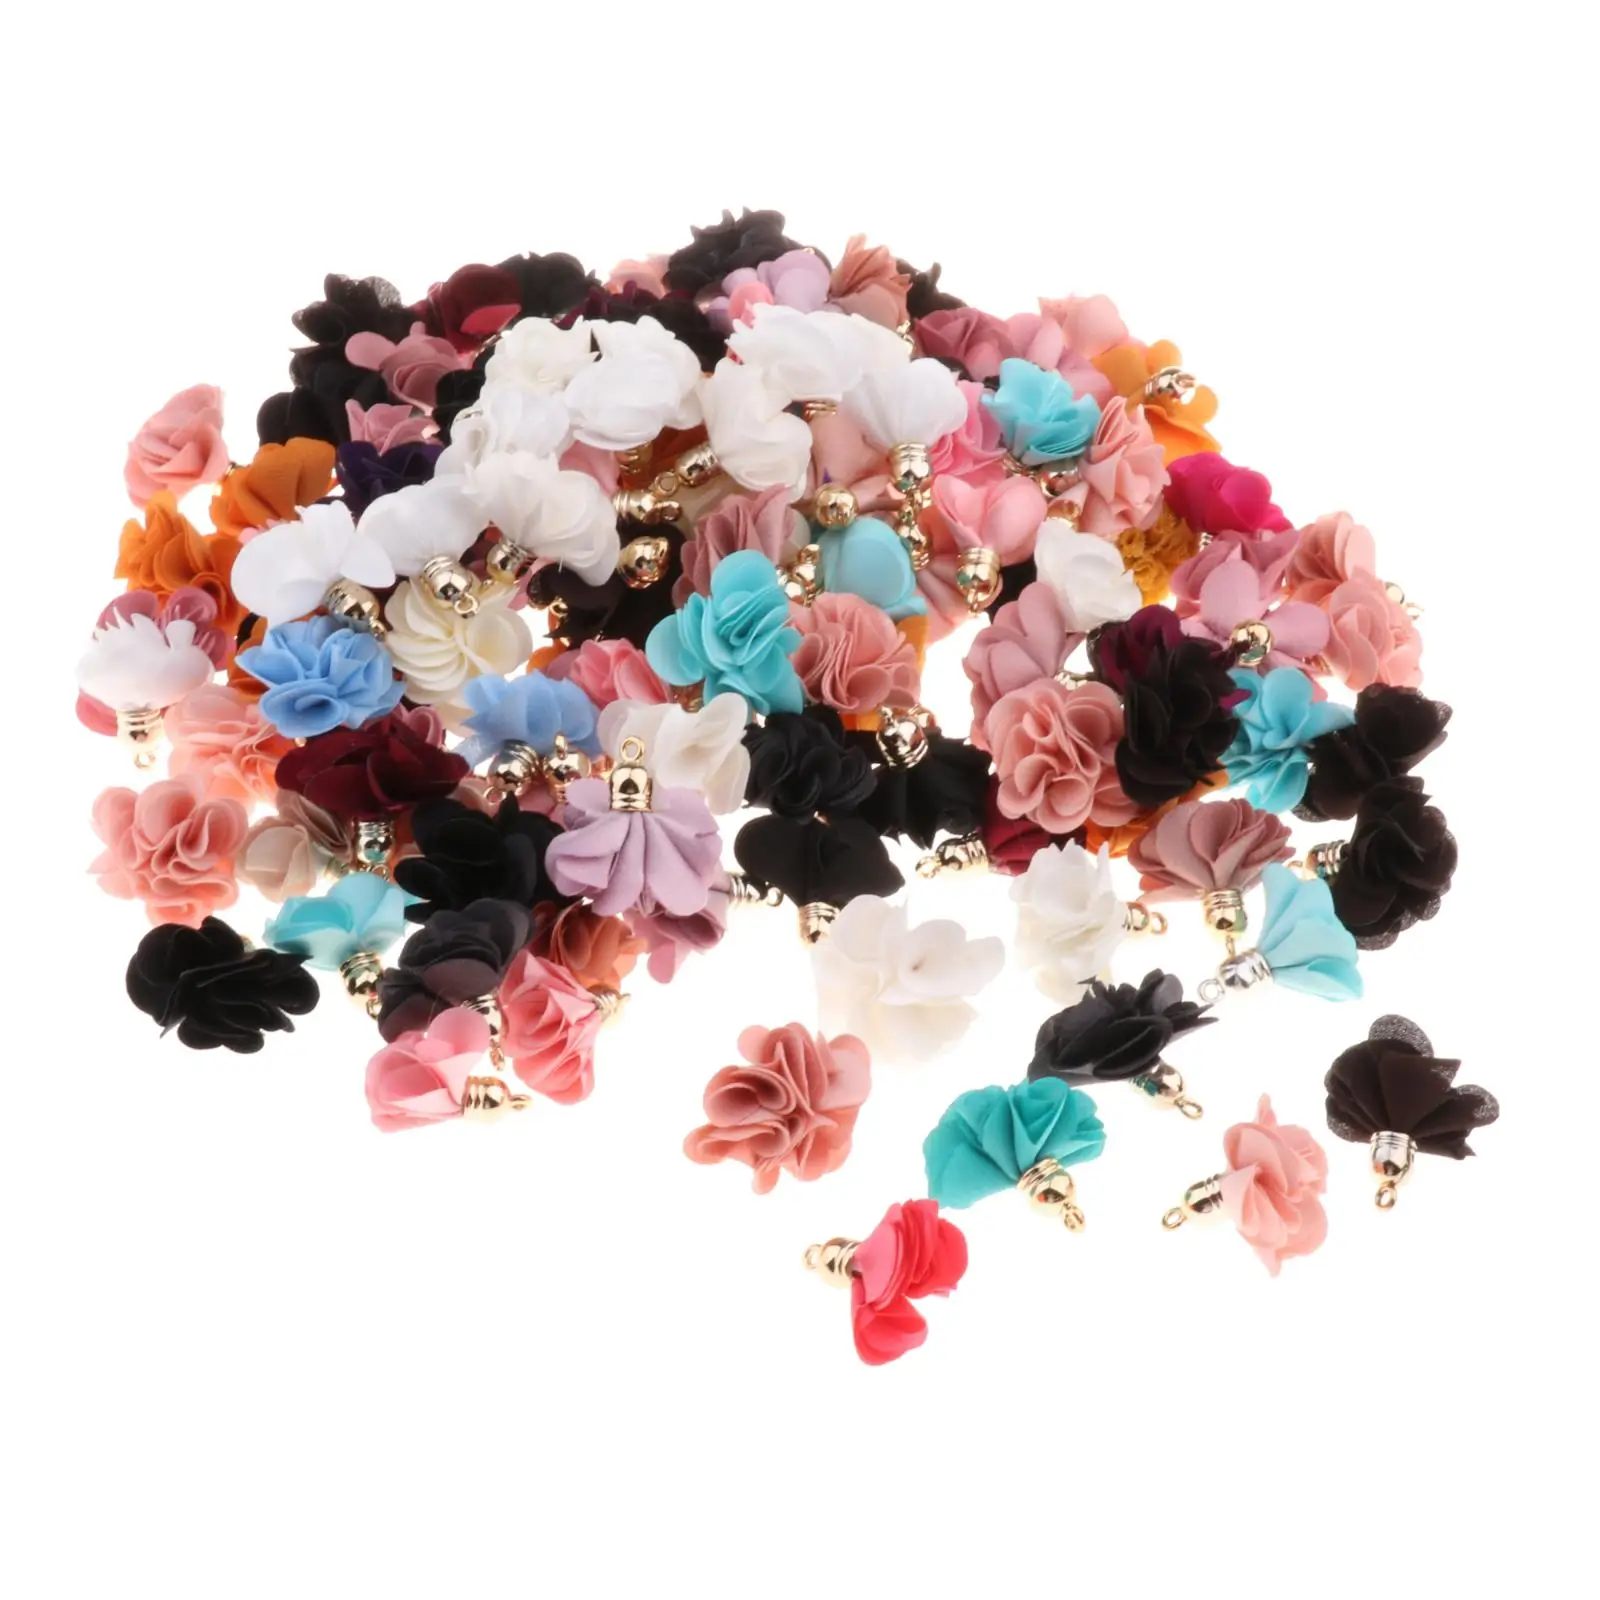 100pcs Cloth Fabric Flower Pendants Tassel Charms DIY, Mixed Color 25-30mm Jewelry Making